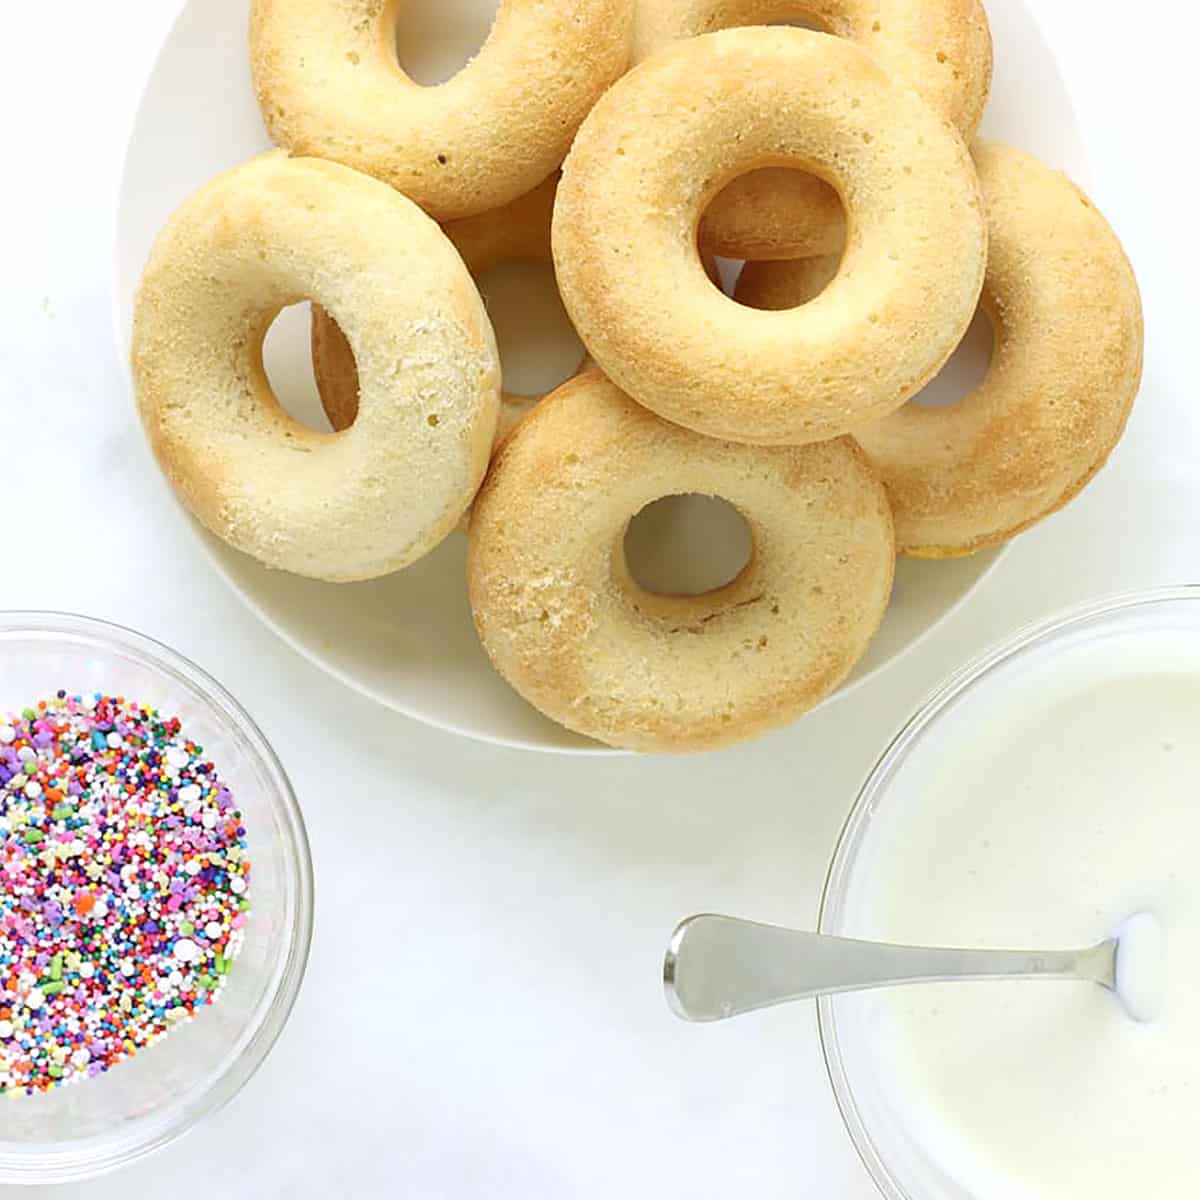 vanilla baked donuts in a dish with a bowl of sprinkles.